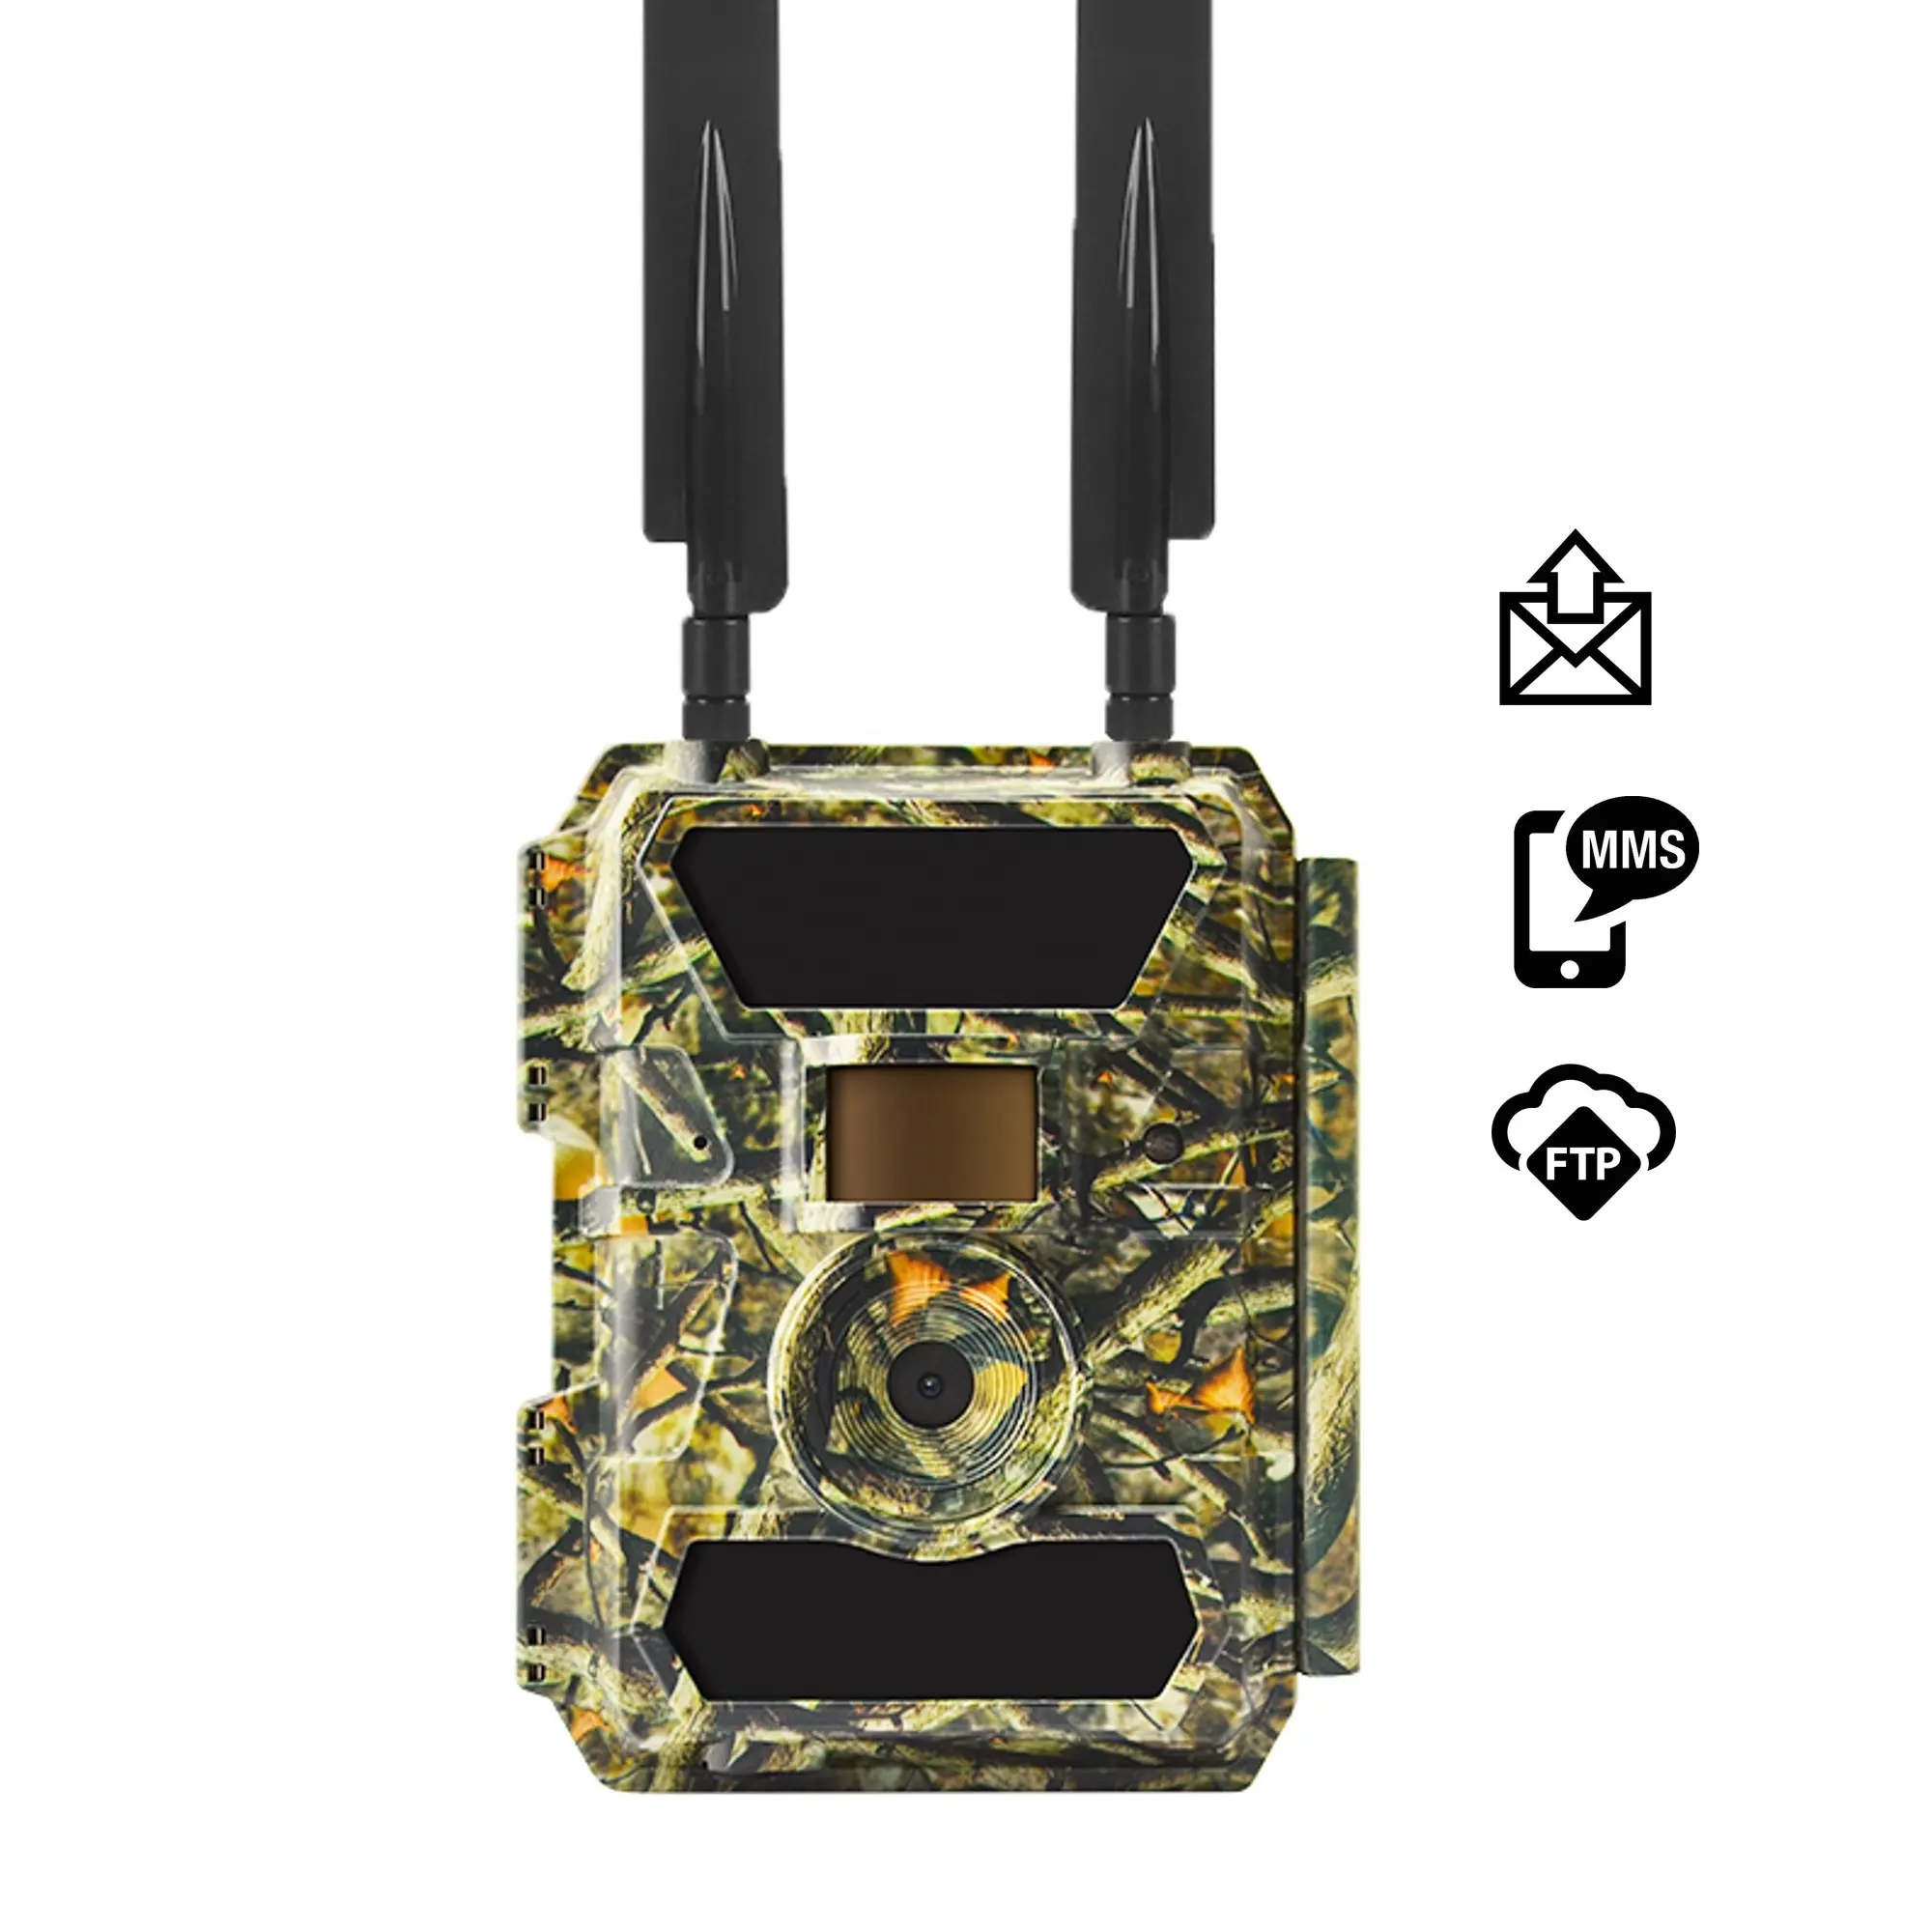 Motion Sensor Outdoor Waterproof Wildlife Game Hunting Scouting Camera 1080P 24MP Trail Cellular Trap Cameras